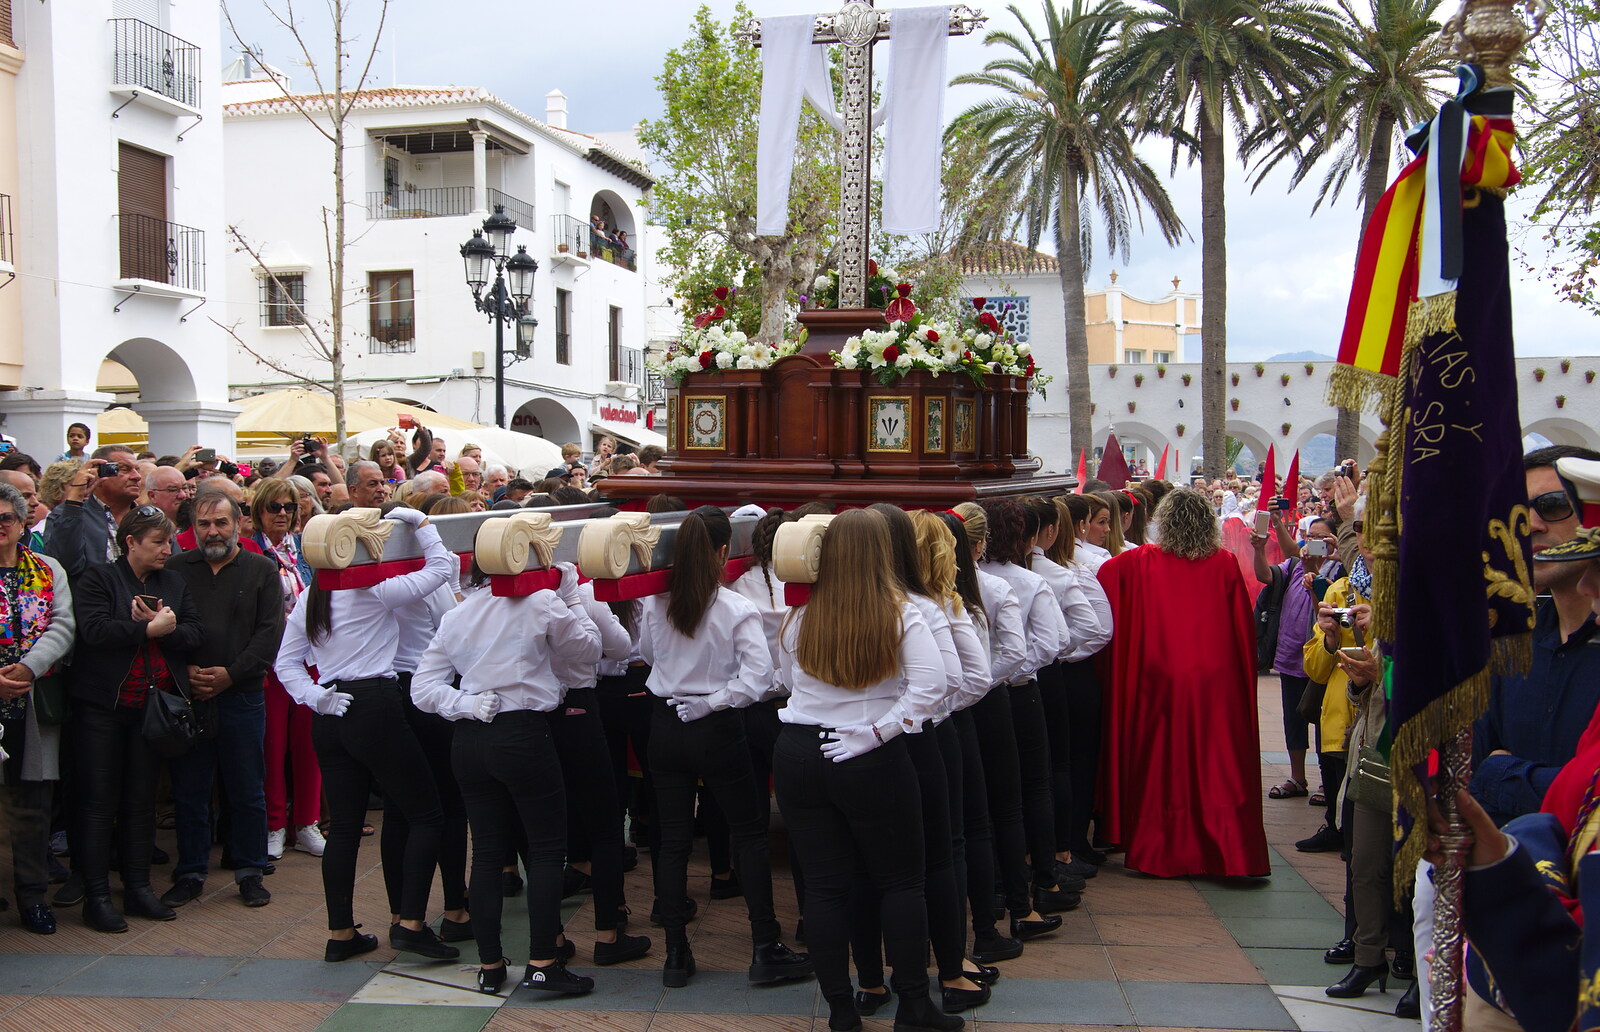 The cross heads off from An Easter Parade, Nerja, Andalusia, Spain - 21st April 2019